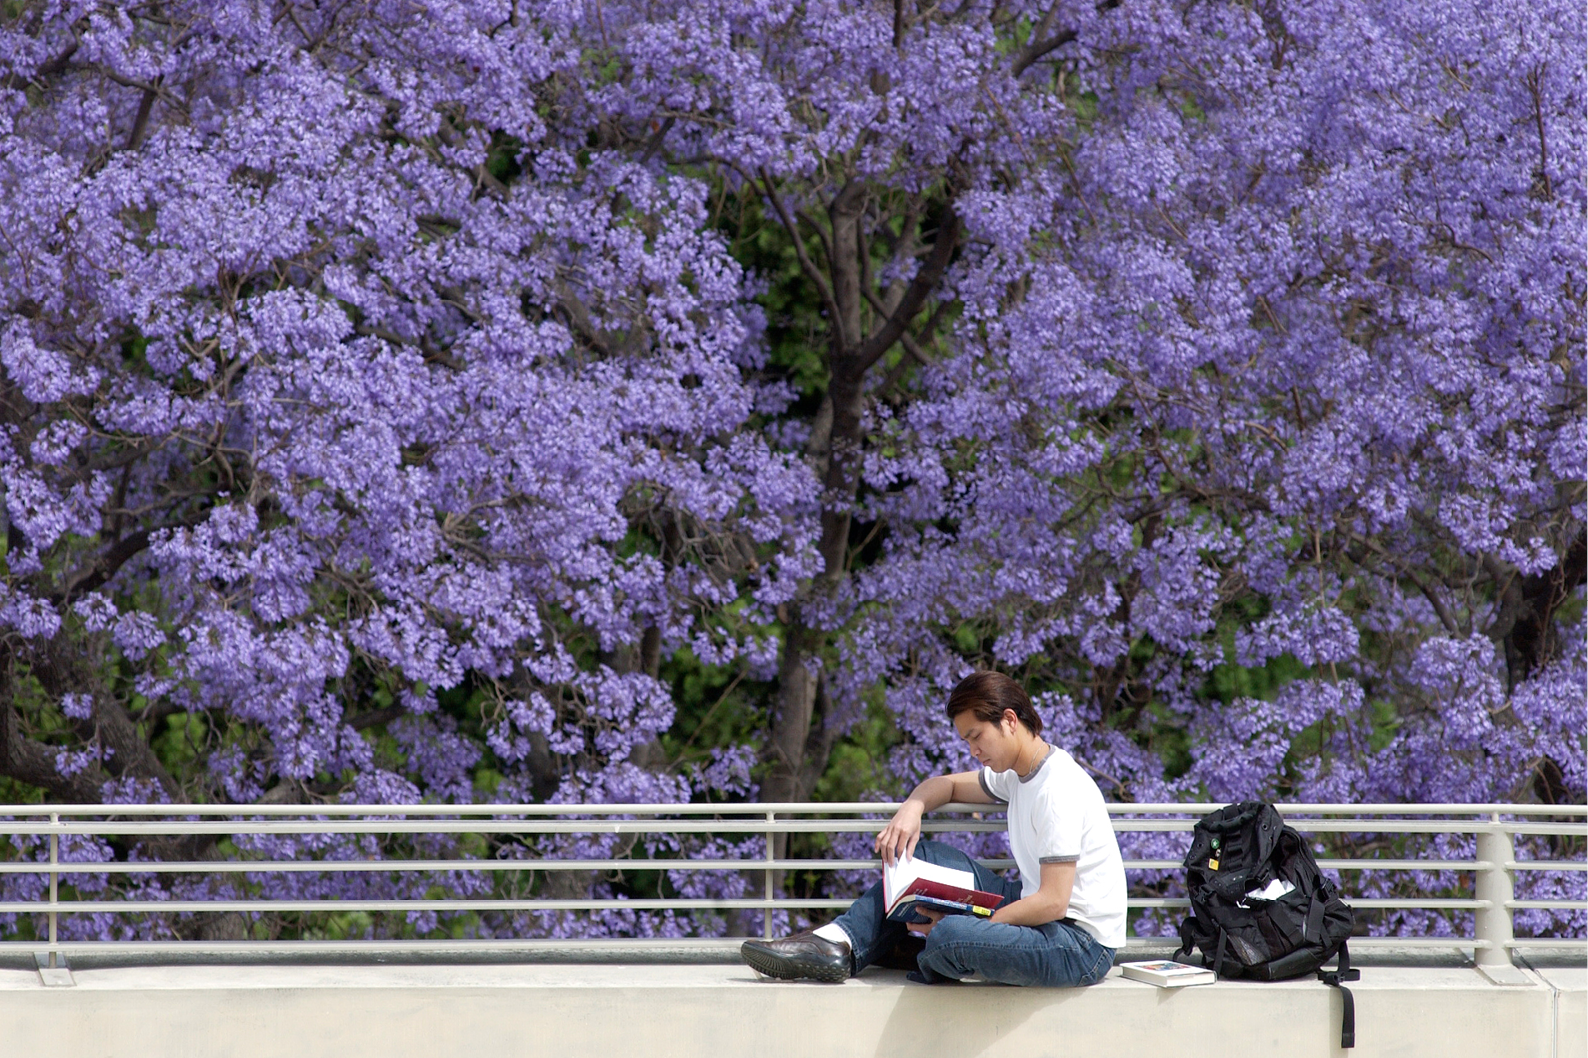 A student studies in front of a purple jacaranda tree